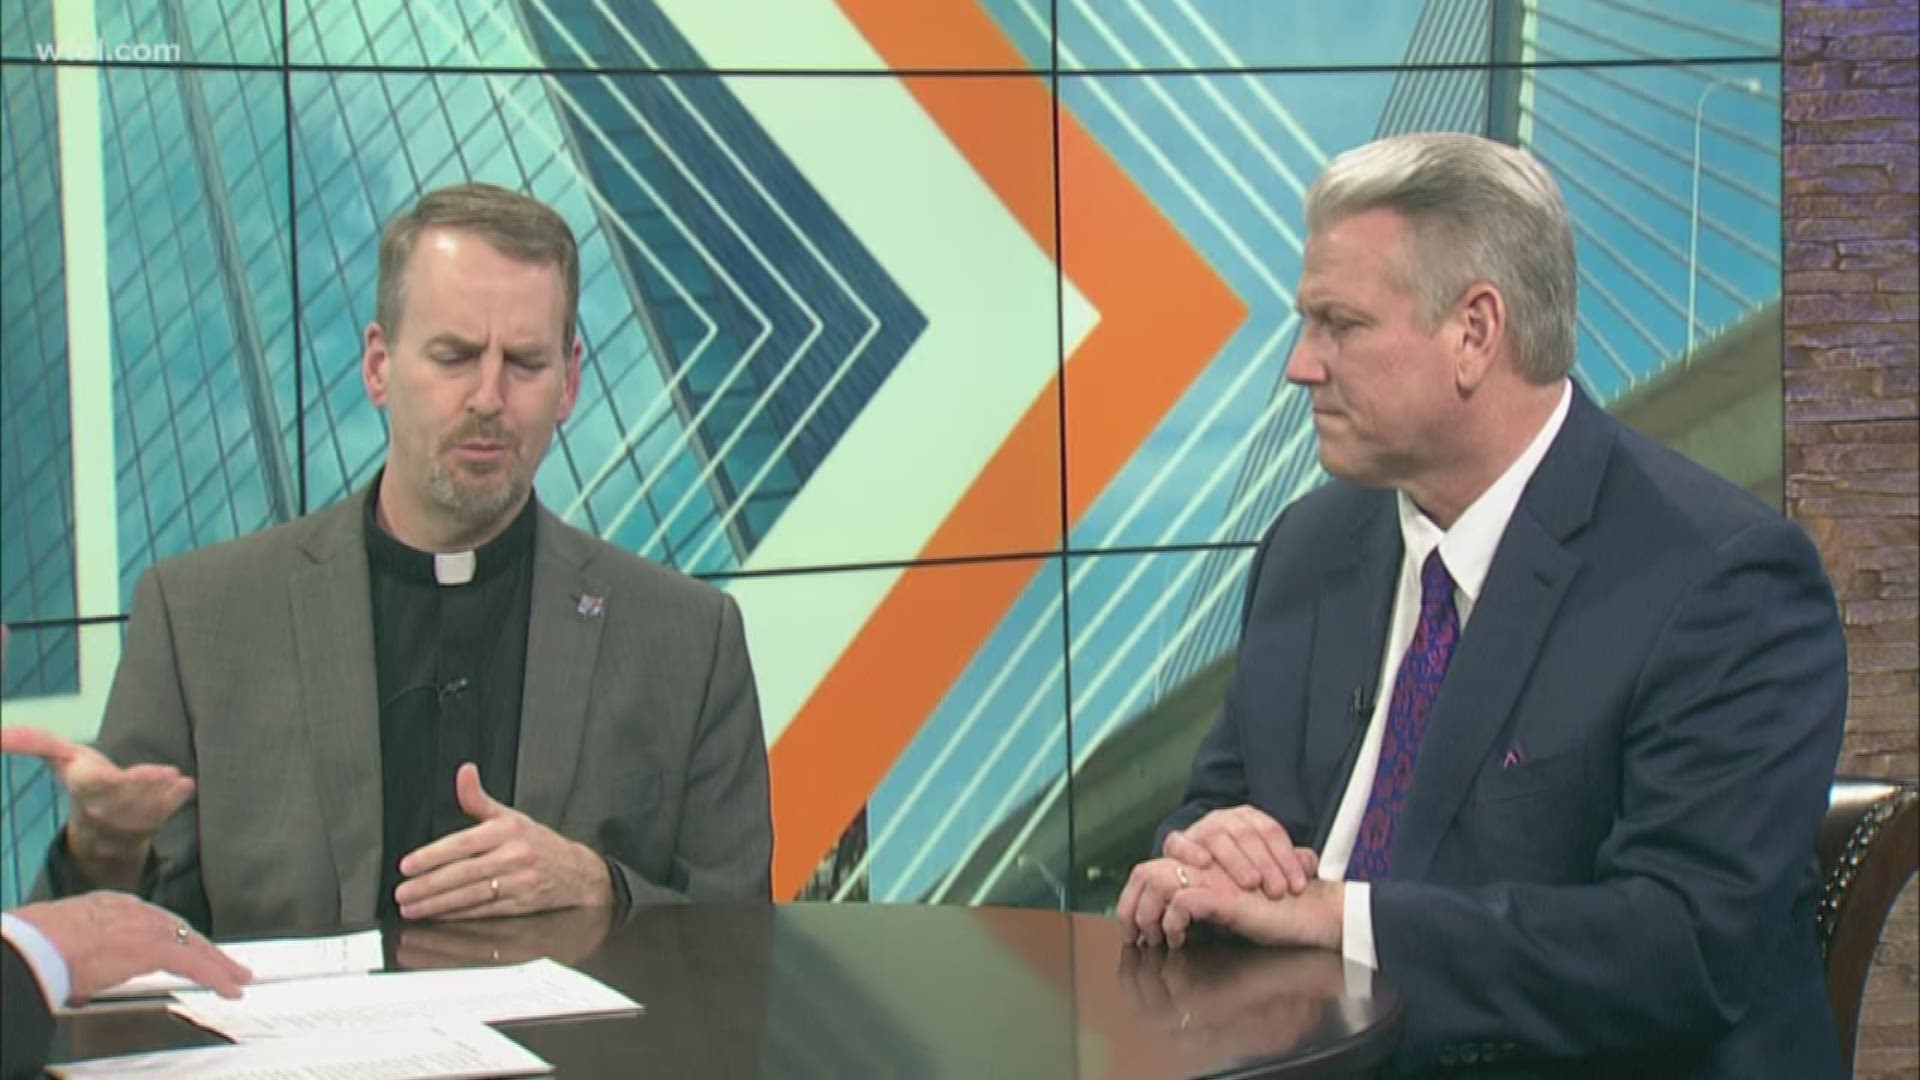 St. Francis High School President Father Geoff Rose and Perrysburg Schools Superintendent Tom Hosler discussed the letter they authored about EdChoice.